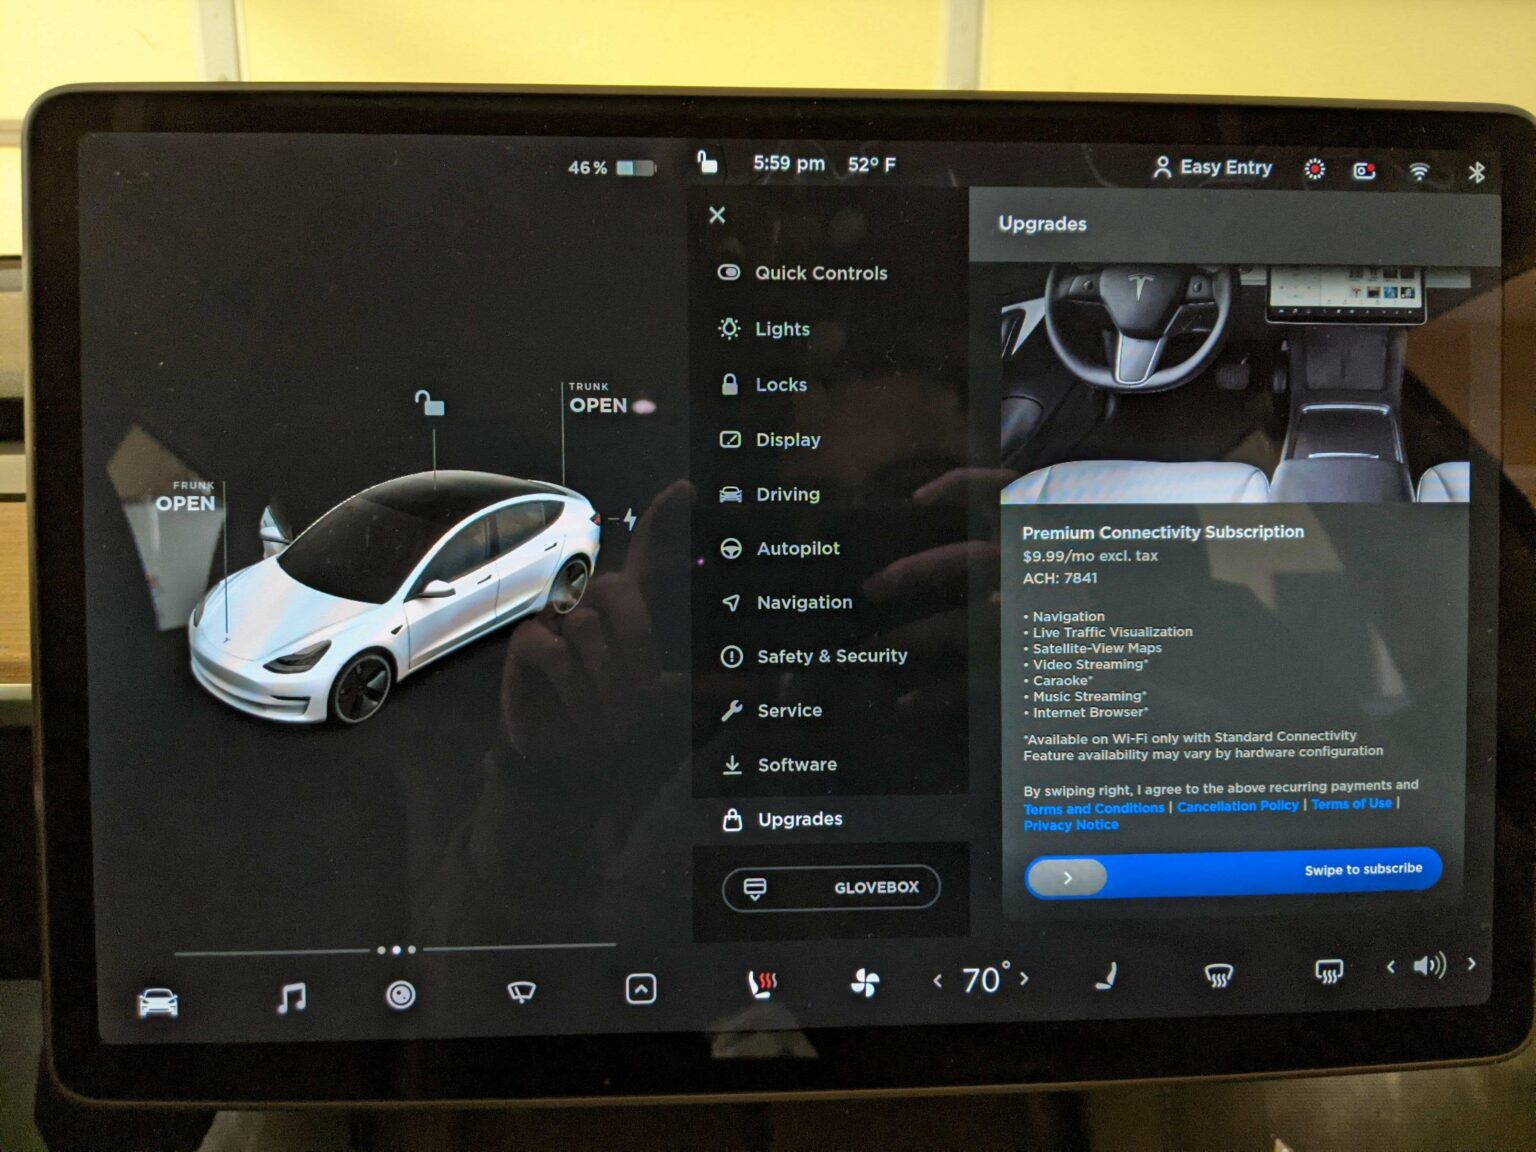 Tesla software update enables incar purchases and subscriptions